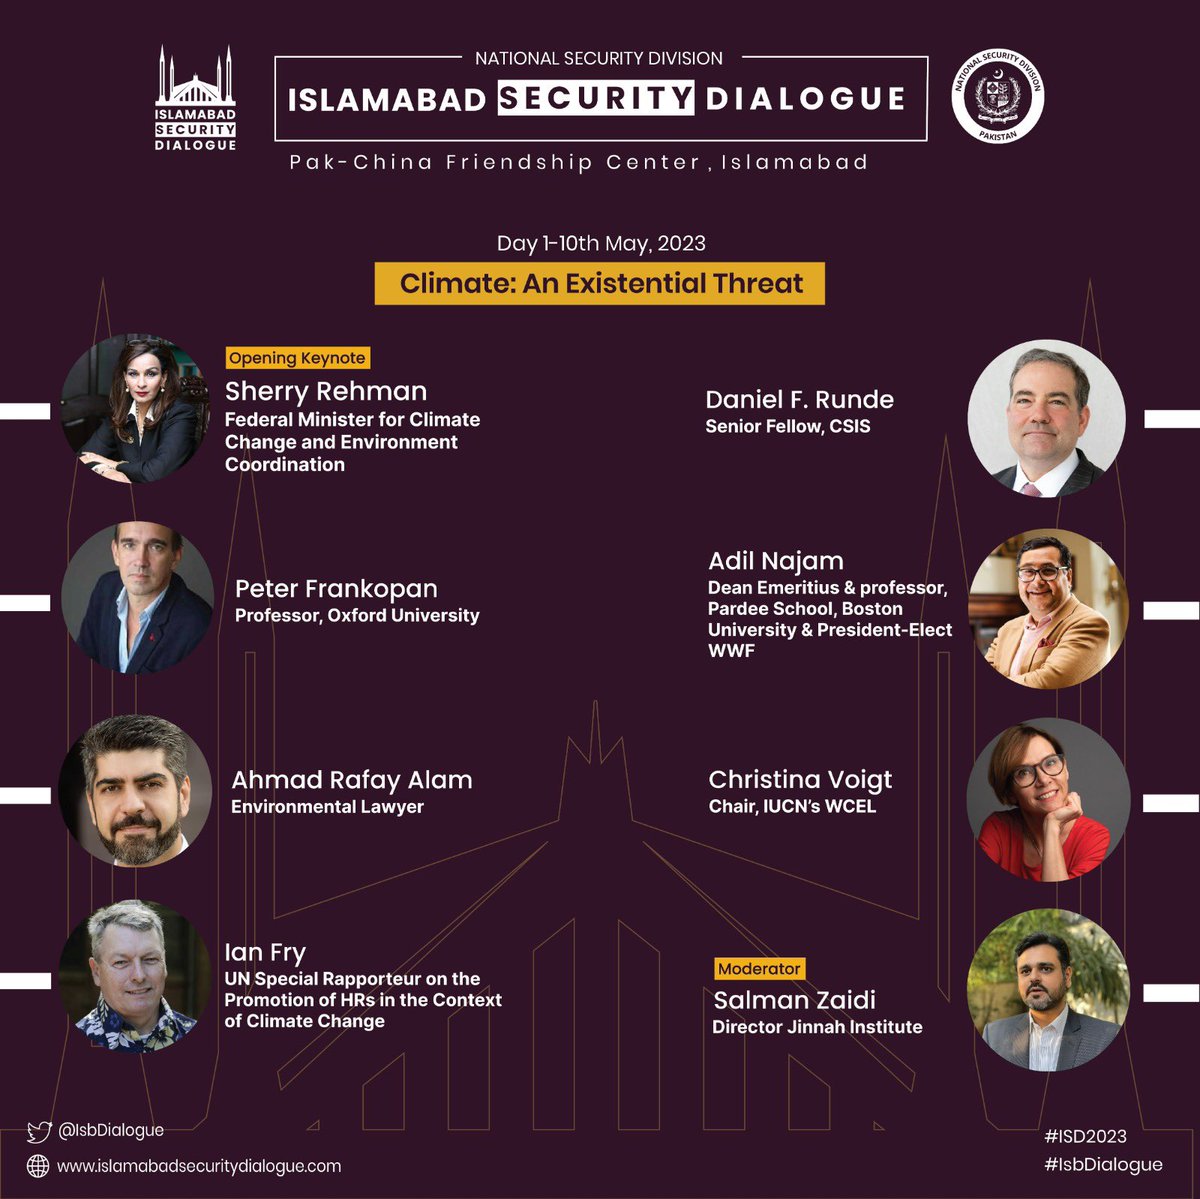 Session 3 - Climate: An Existential Threat was held on the 1st day of the #ISD2023 @sherryrehman delivered the keynote @salmanzaidi22 moderated an excellent session with @AdilNajam @peterfrankopan @ChristinaVoigt2 @rafay_alam @Falai02 #DanielFRunde youtu.be/oULiSRX6IkQ